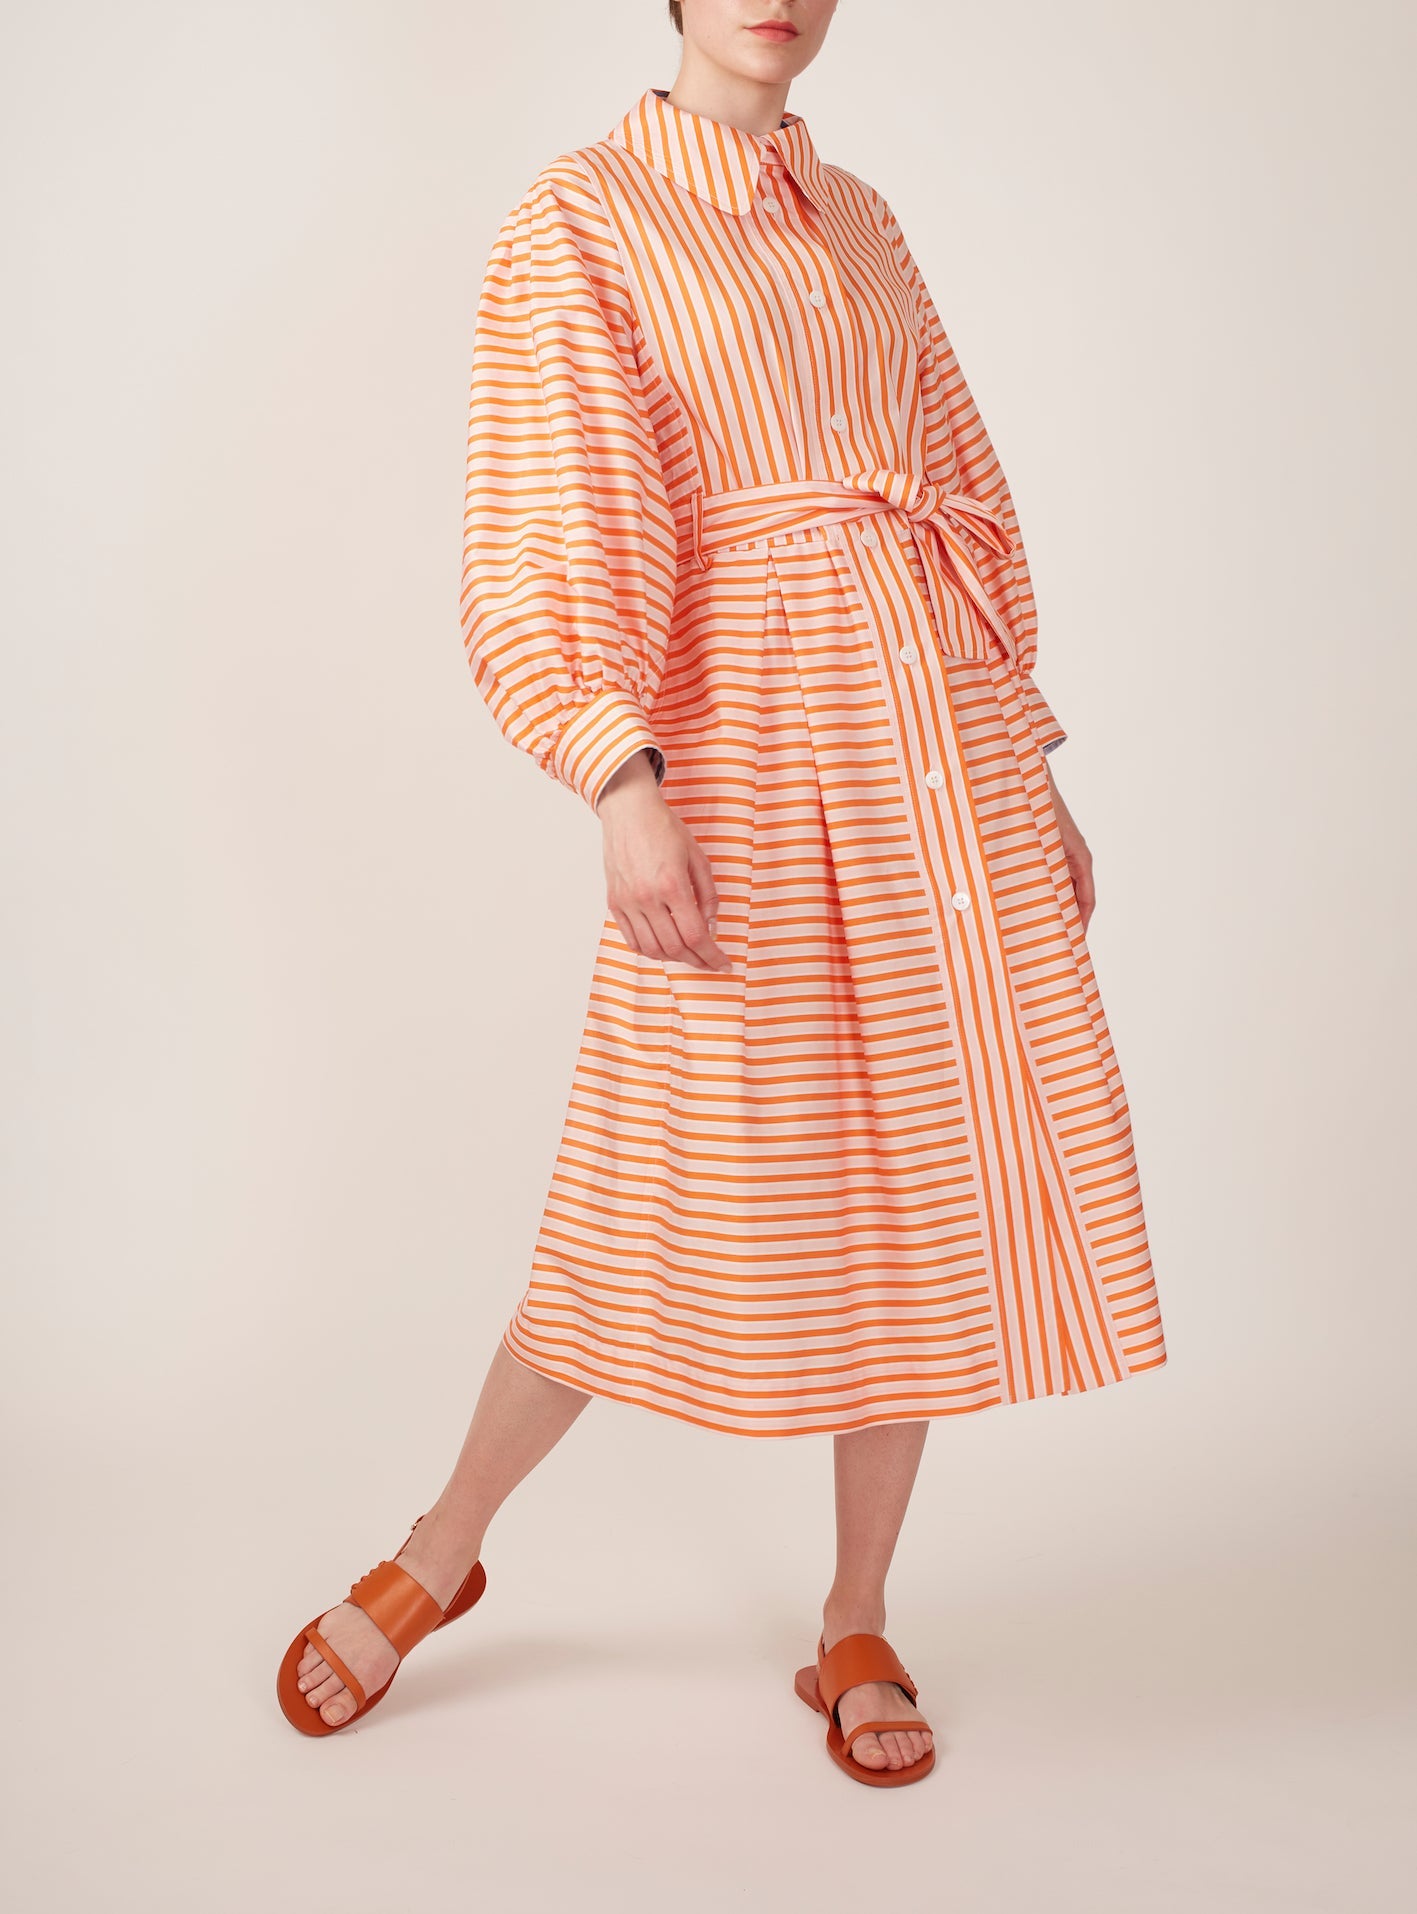 Front view of Yvonne  Mayfair Orange Dress by Thierry Colson